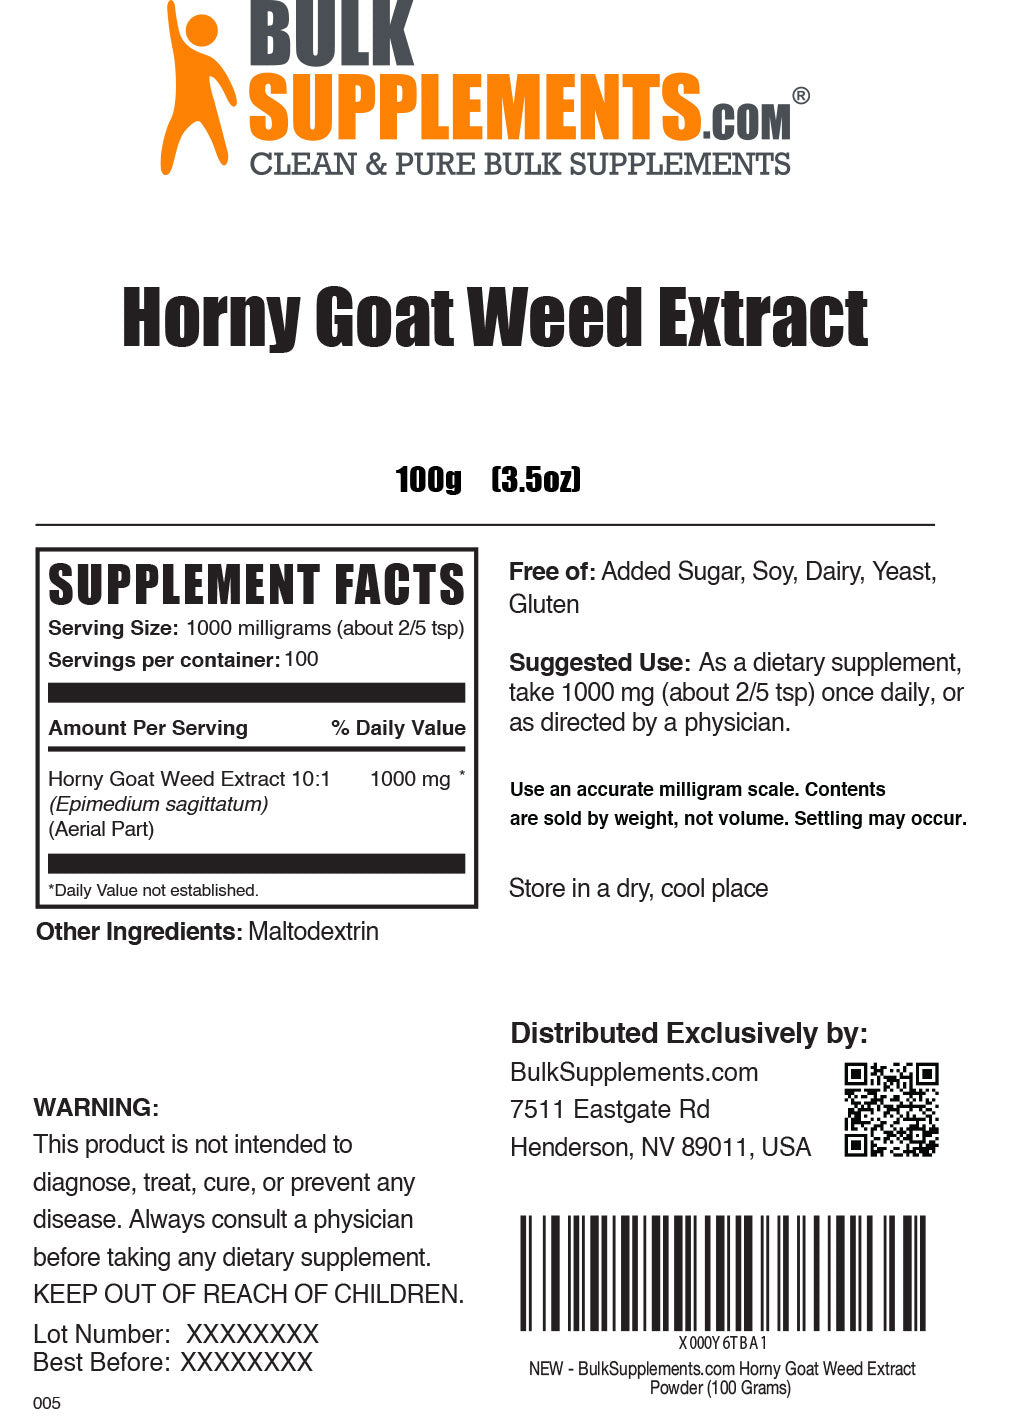 Horny Goat Weed Extract powder label 100g